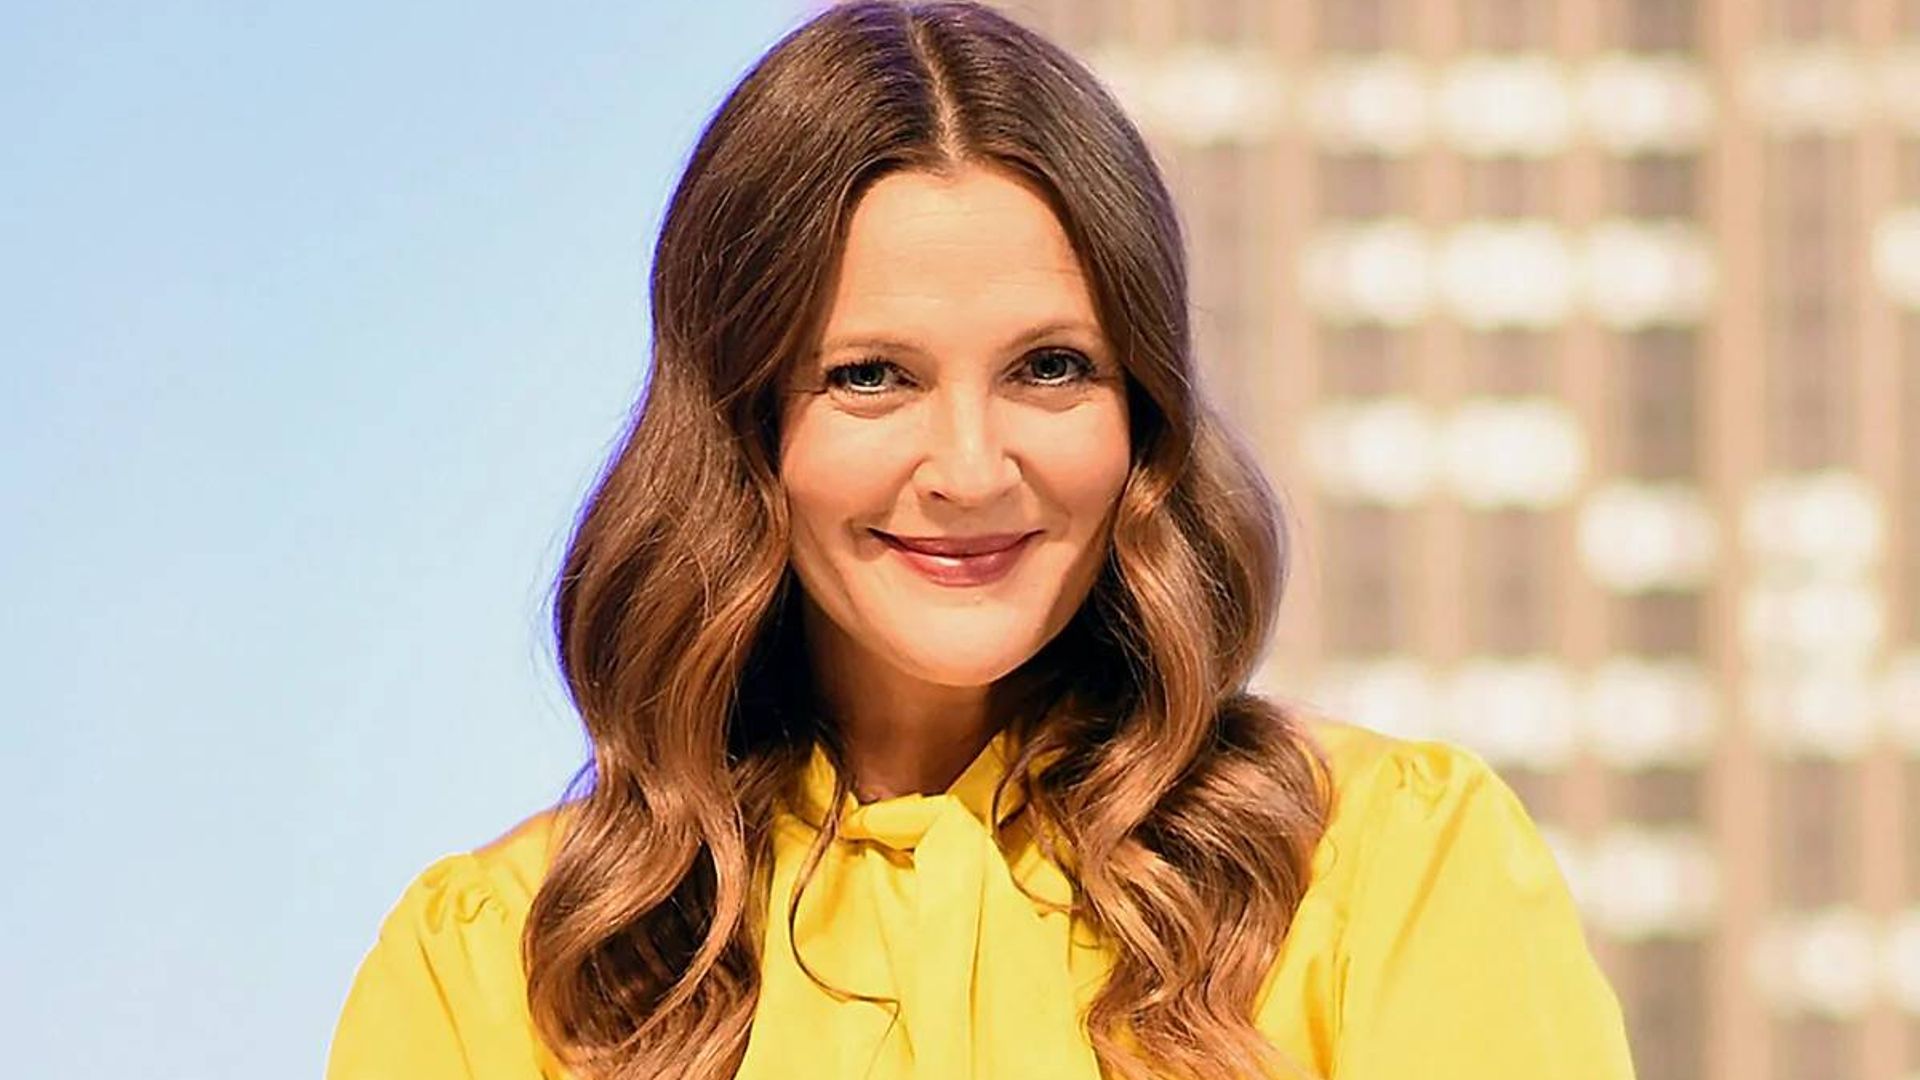 Drew Barrymore is obsessed with this $18 skin-clearing face mask